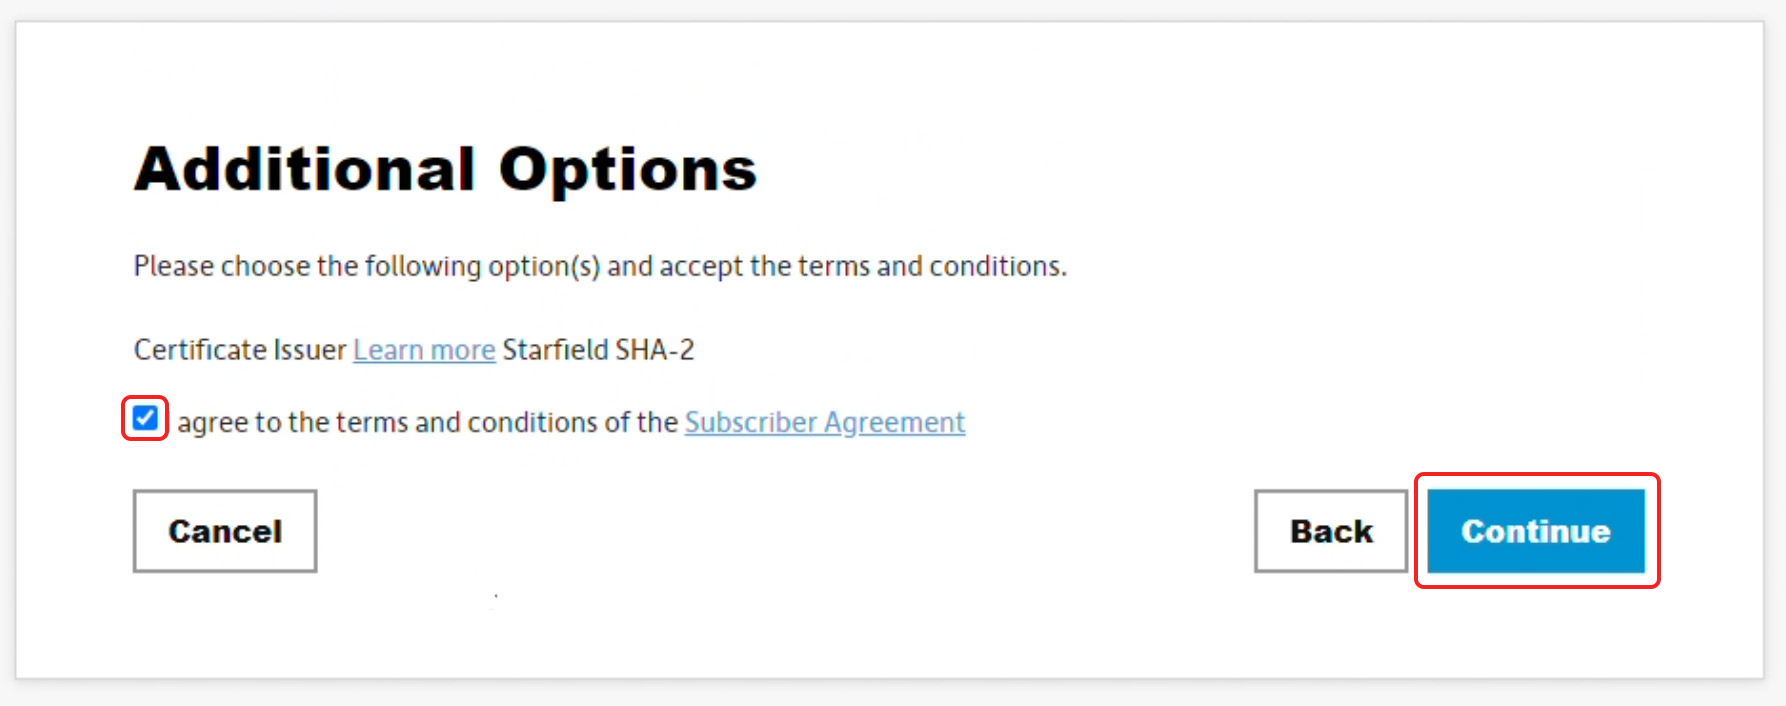 Agree to Subscriber Agreement